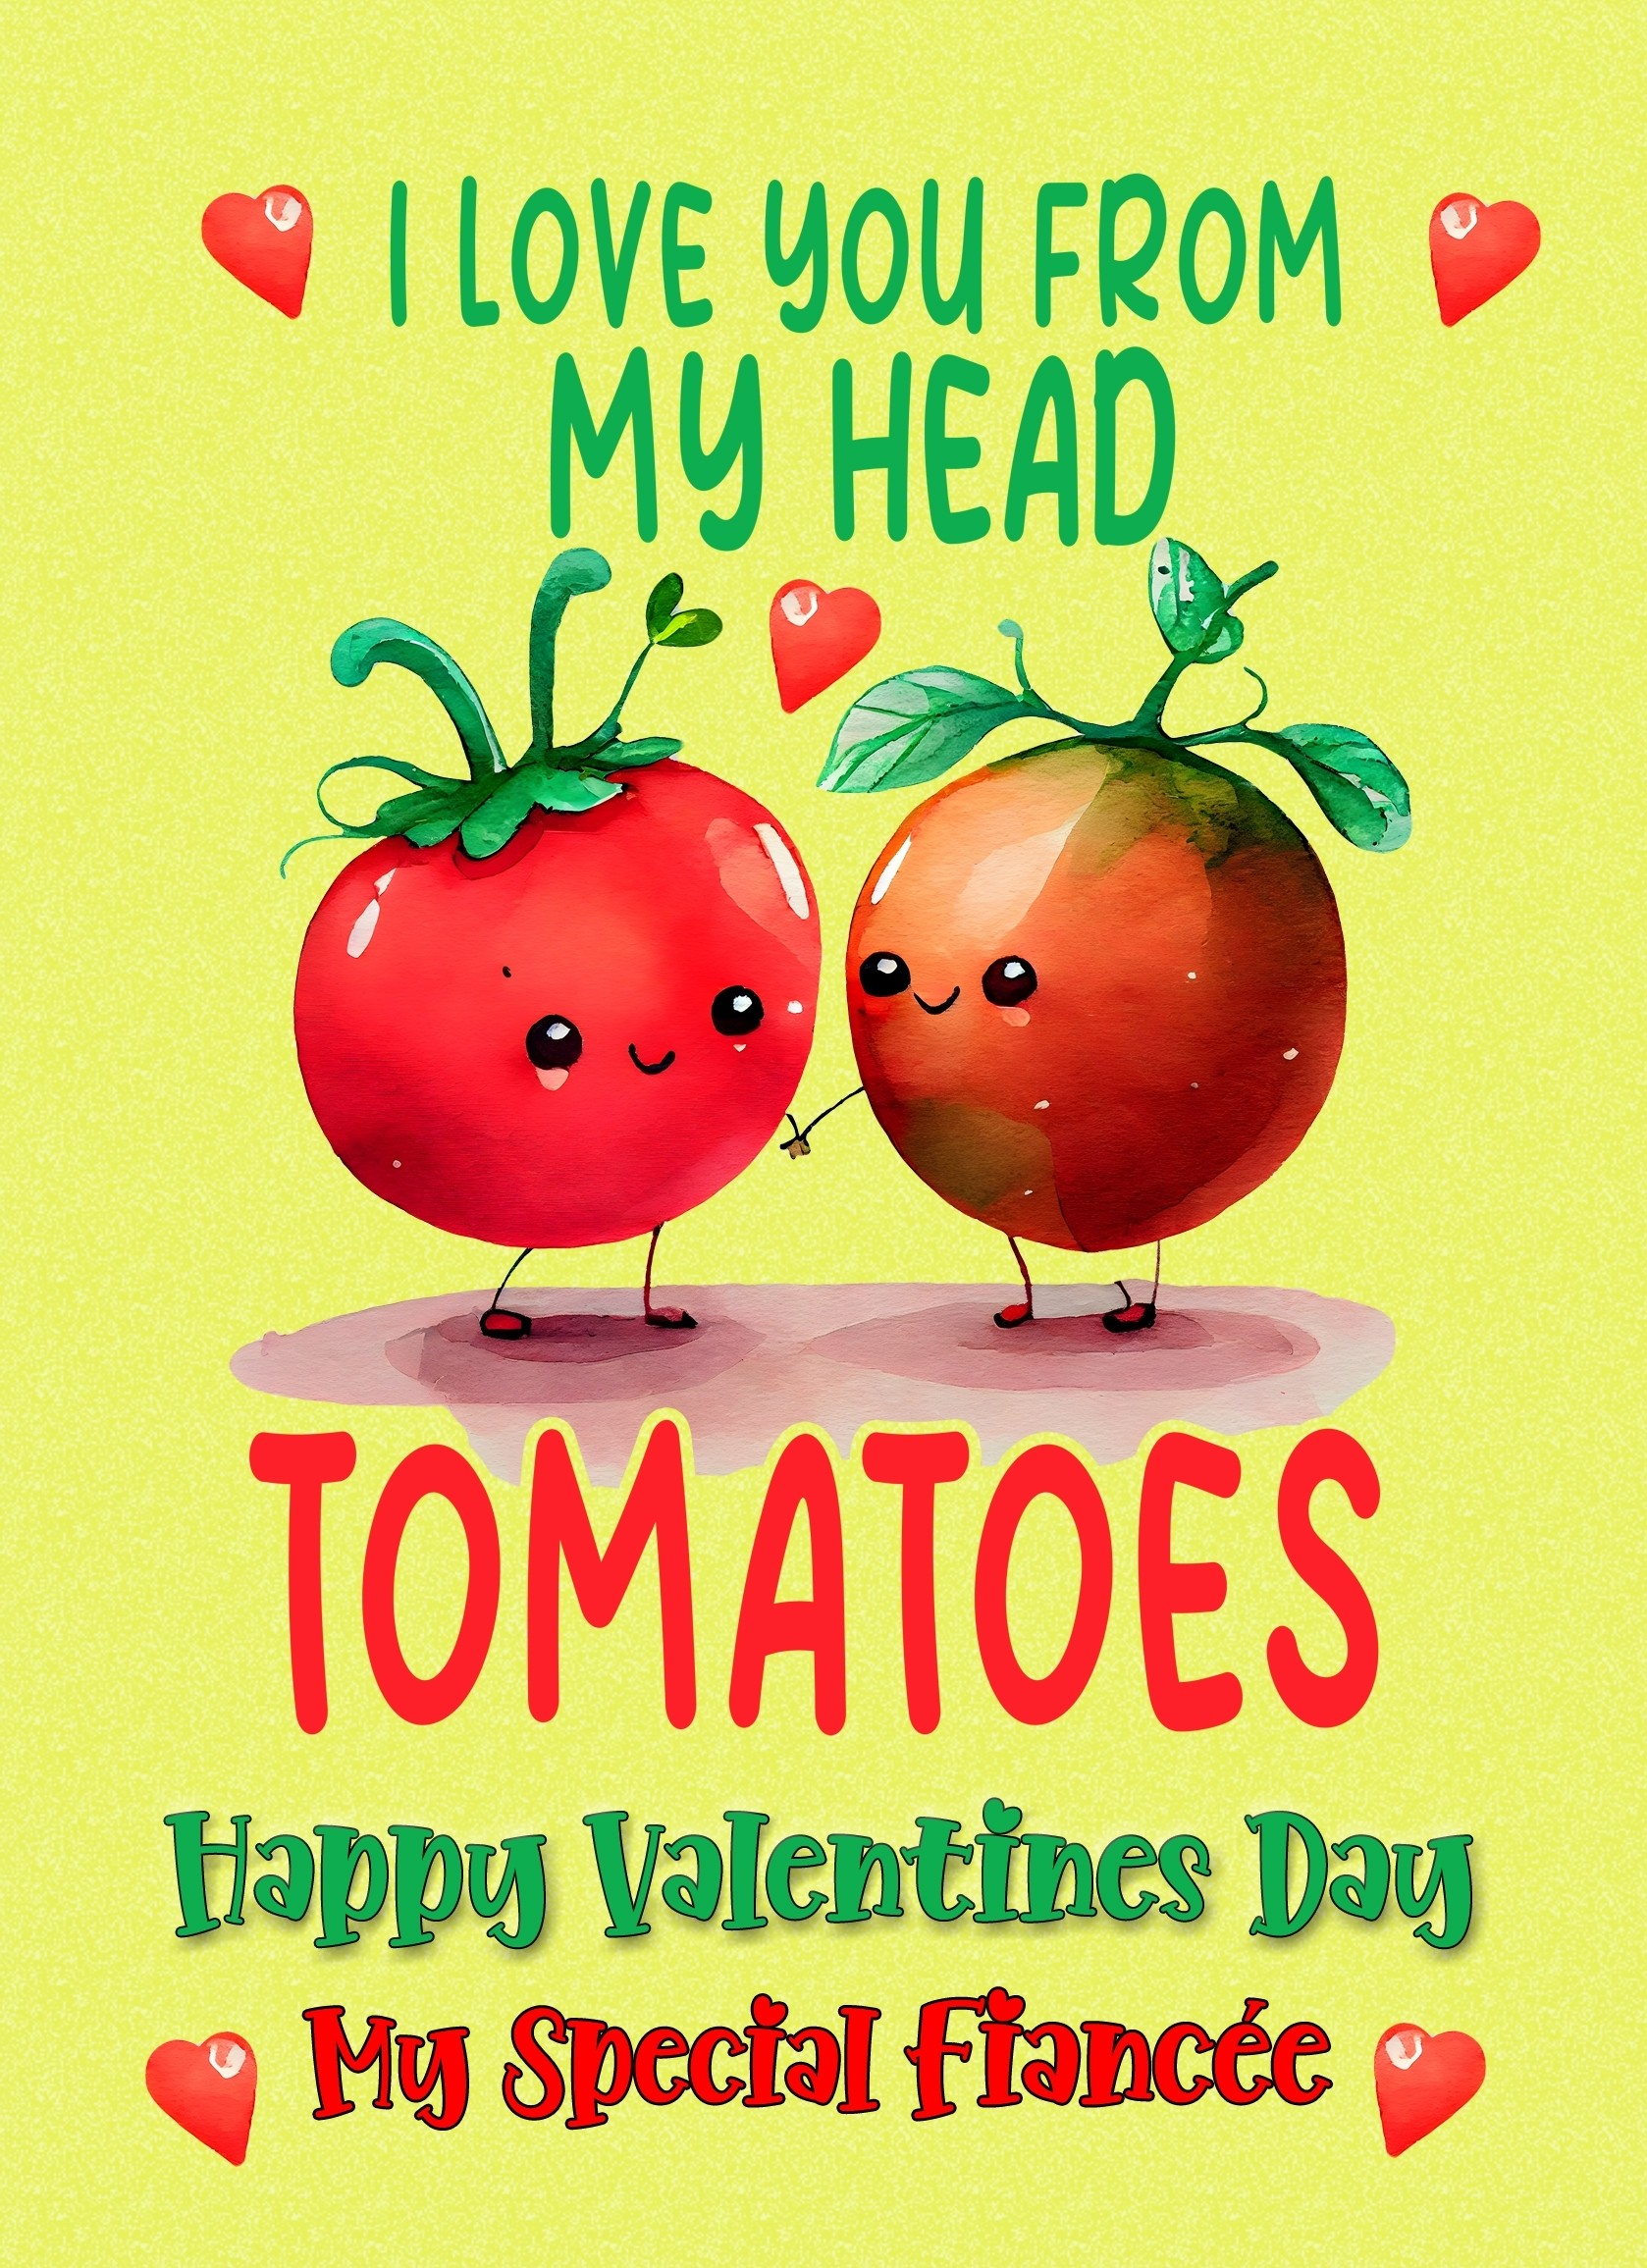 Funny Pun Valentines Day Card for Fiancee (Tomatoes)